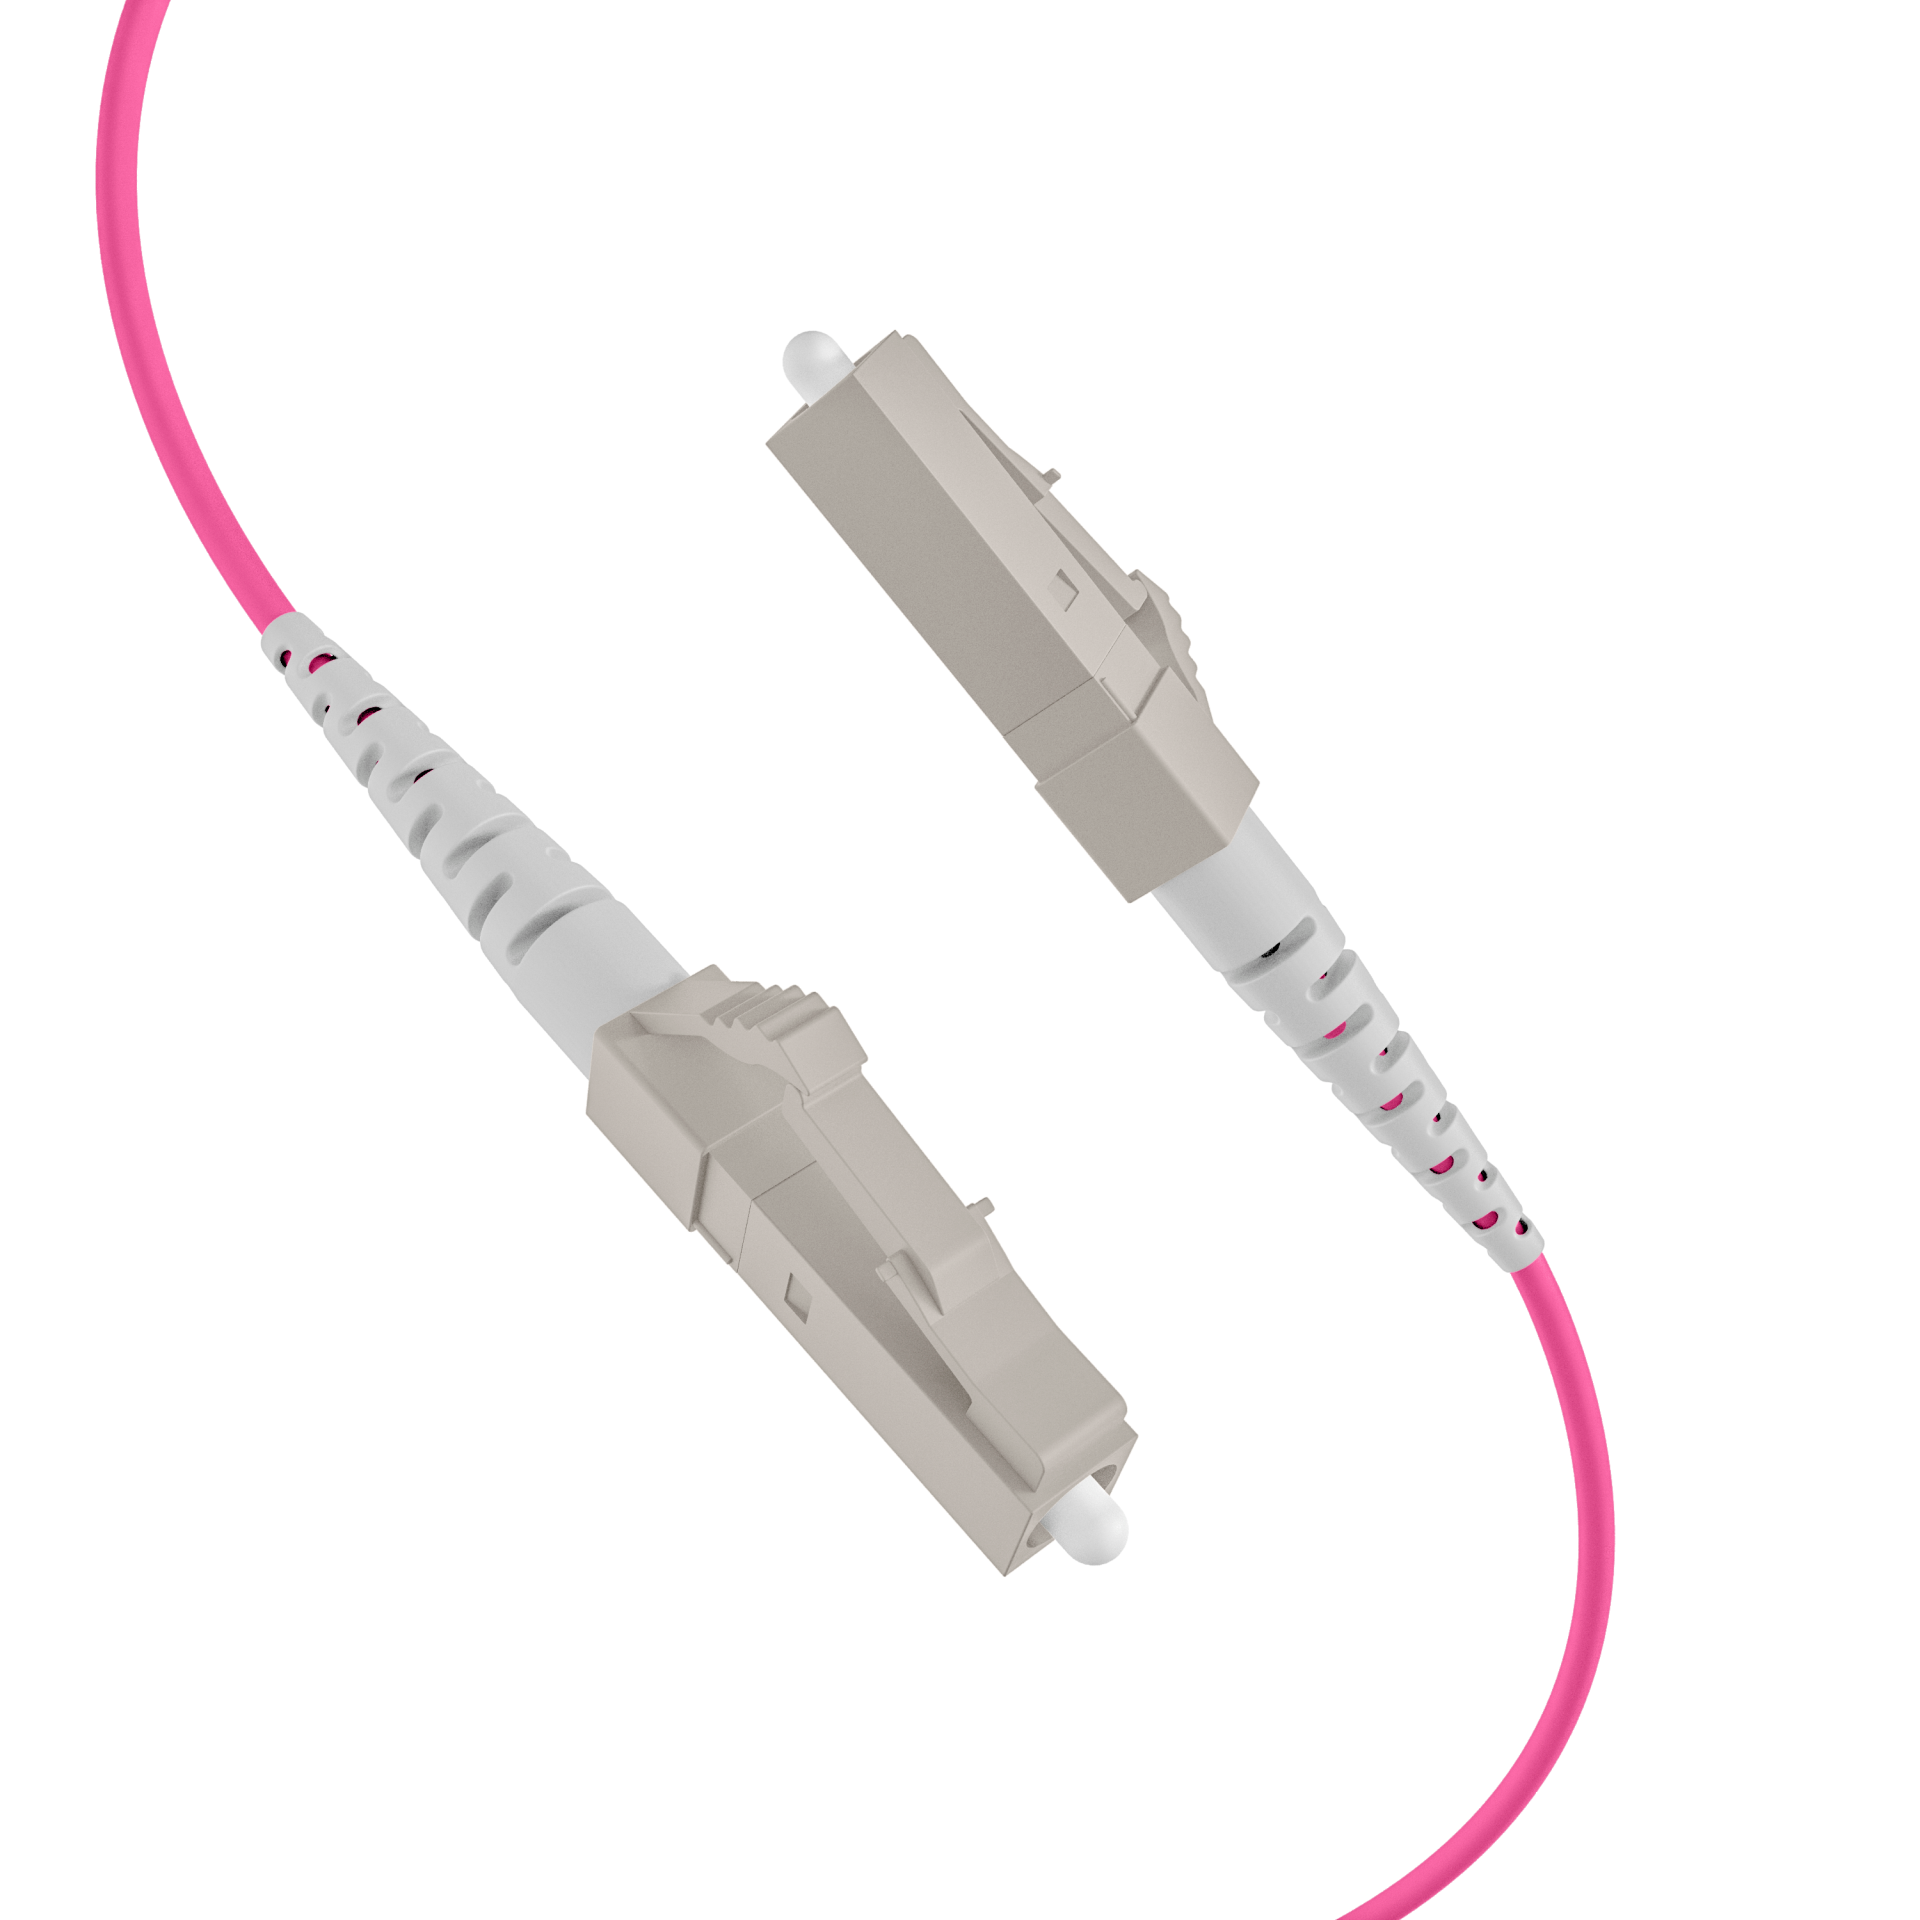 Trunkcable U-DQ(ZN)BH OM4 12G (1x12) LC-LC,200m Dca LSZH